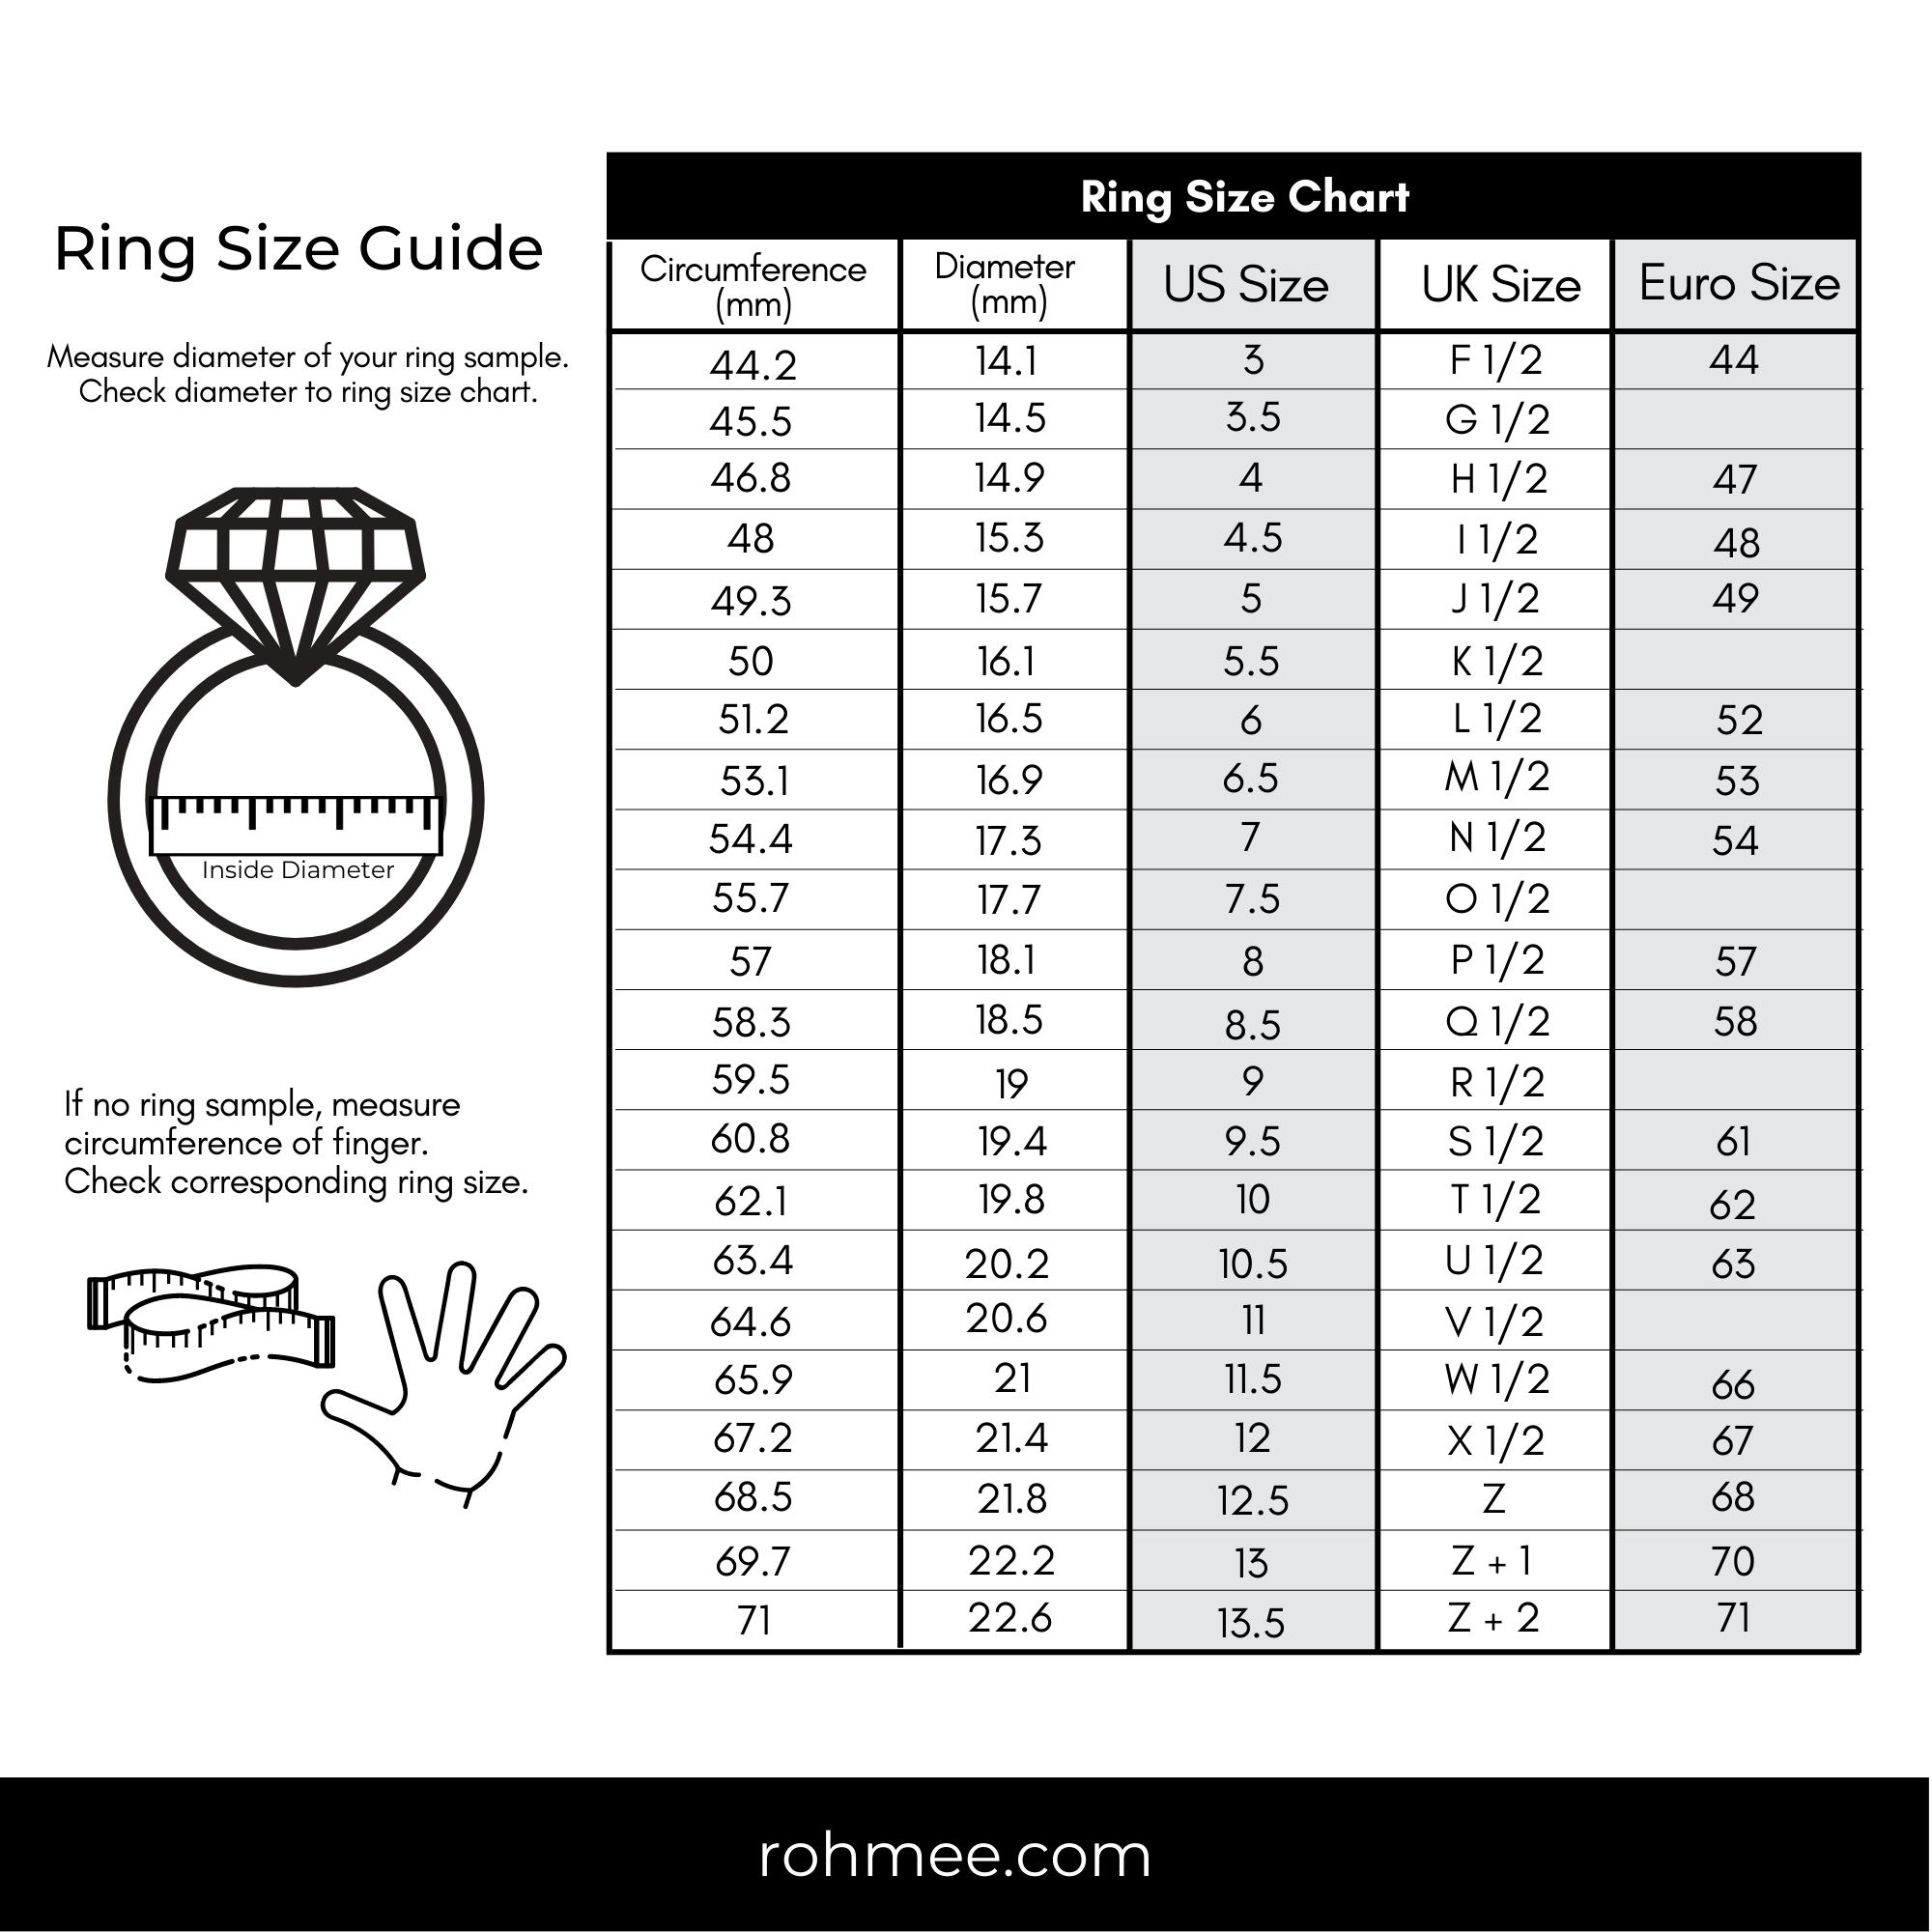 Jewelry Size Guides – [ROH-mee] Diamonds